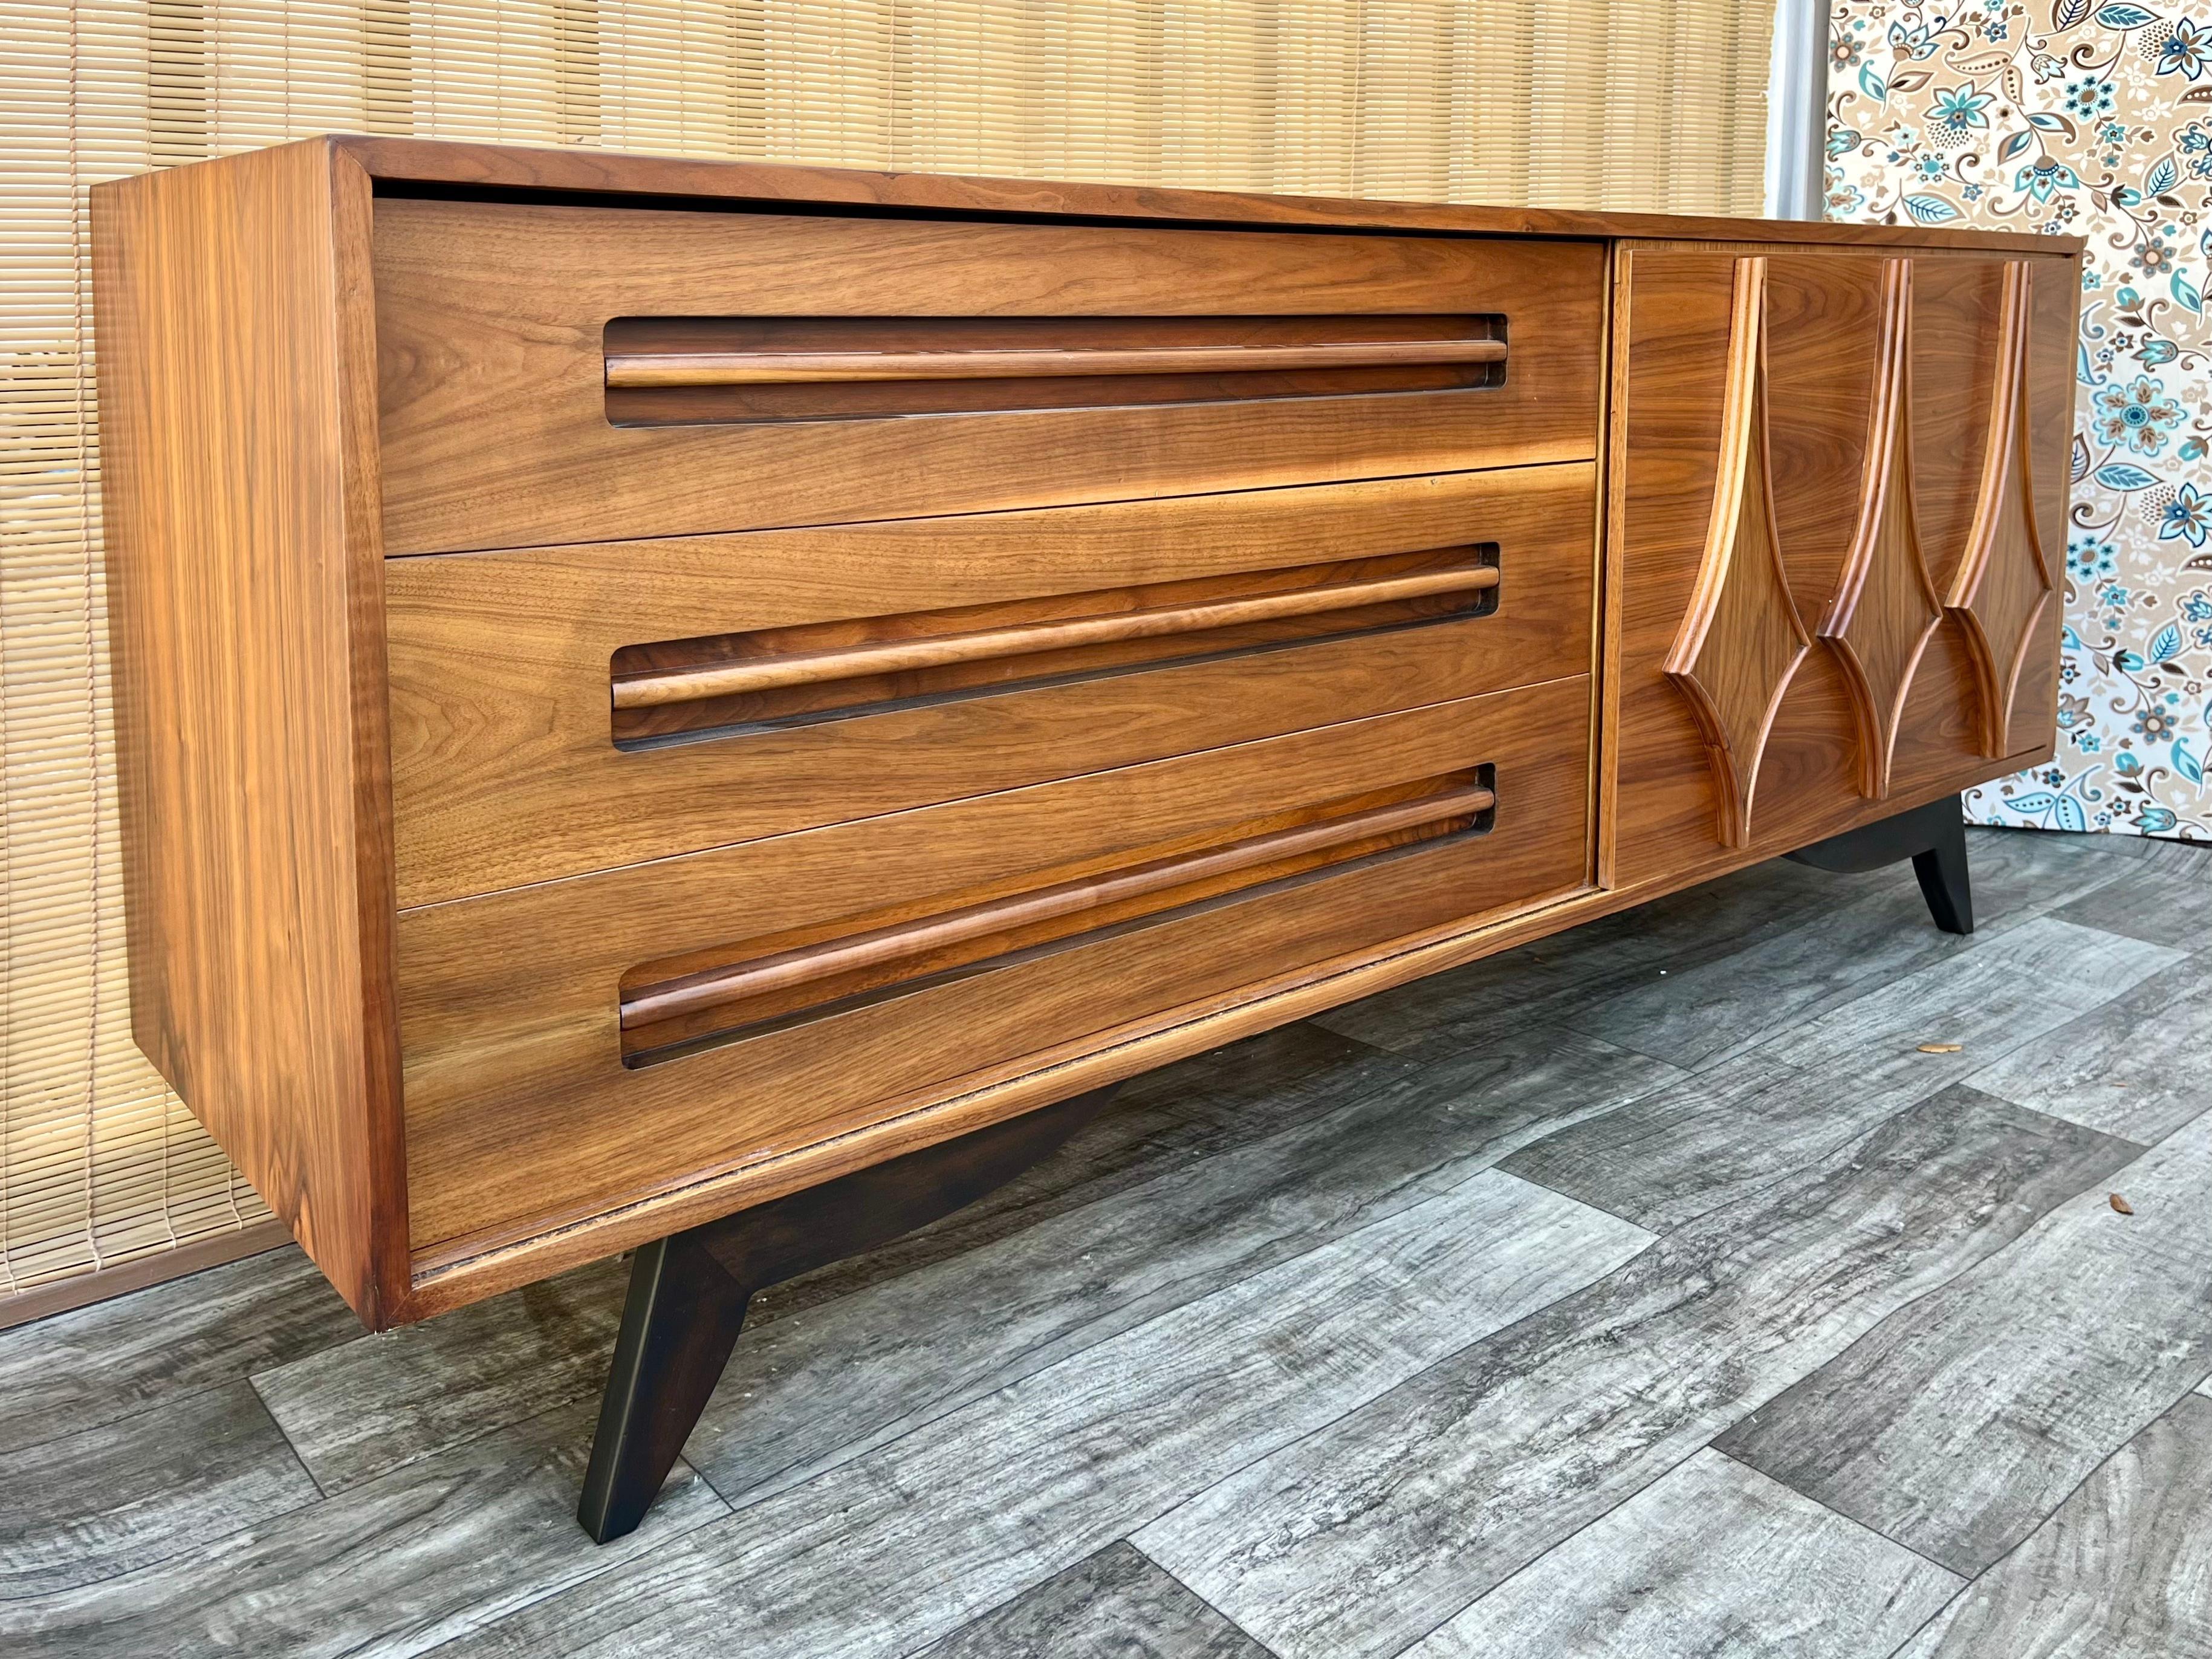 Vintage Fully Restored Mid Century Modern Six Drawers Credenza by Young Manufacturing. Circa 1960s
Features a quintessential Mid Century Modern sleek Design, with three large exposed drawers and three drawers hidden behind a sliding door with a